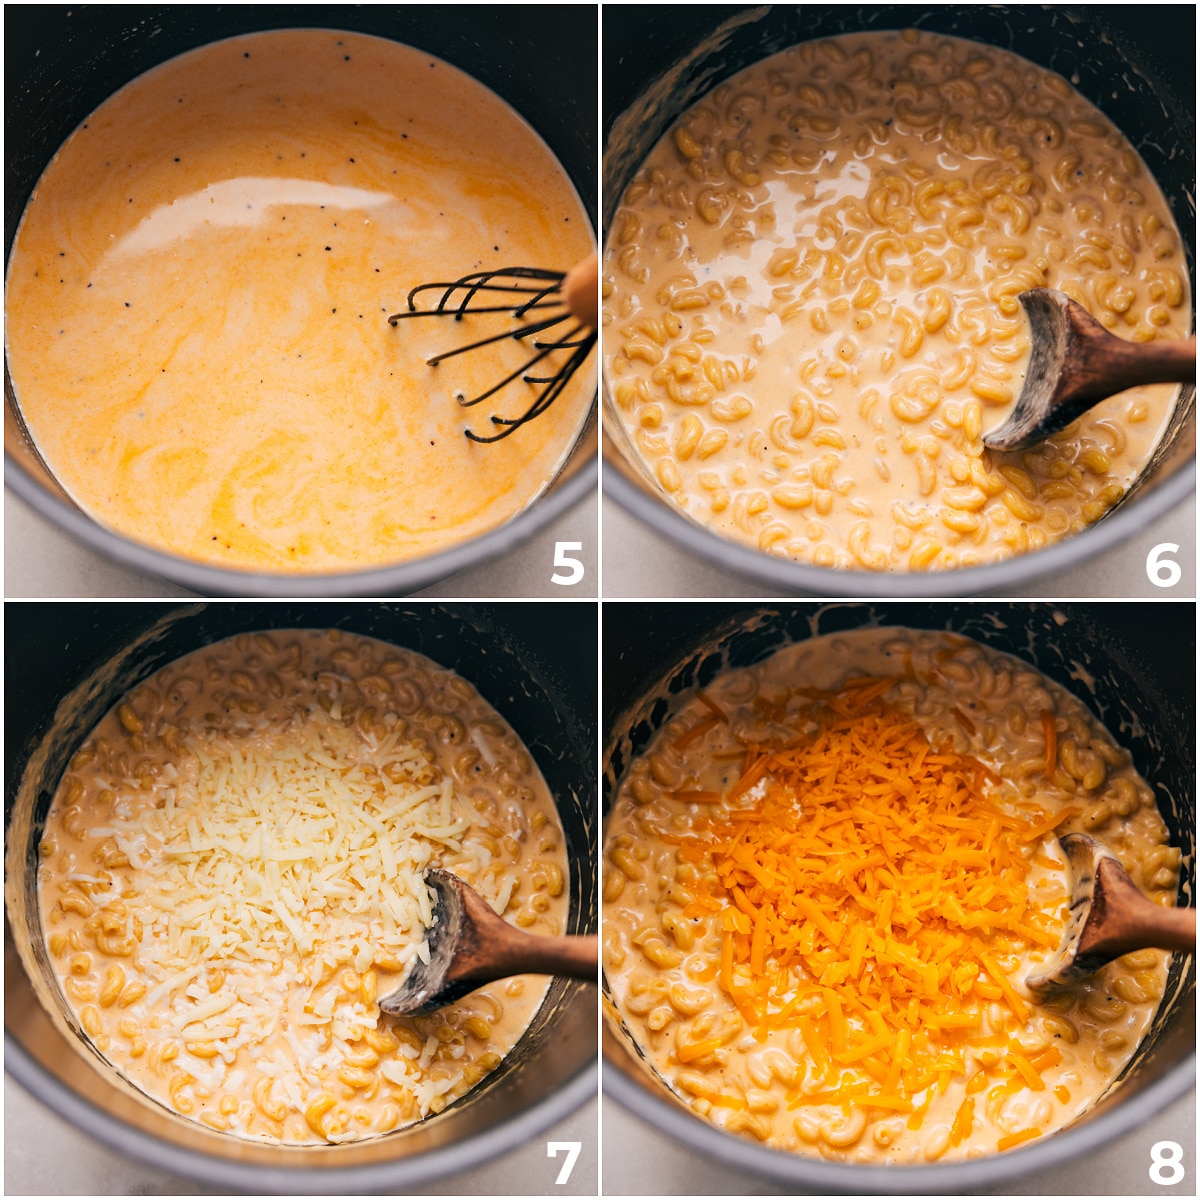 The pasta being added and the different cheese being mixed in.